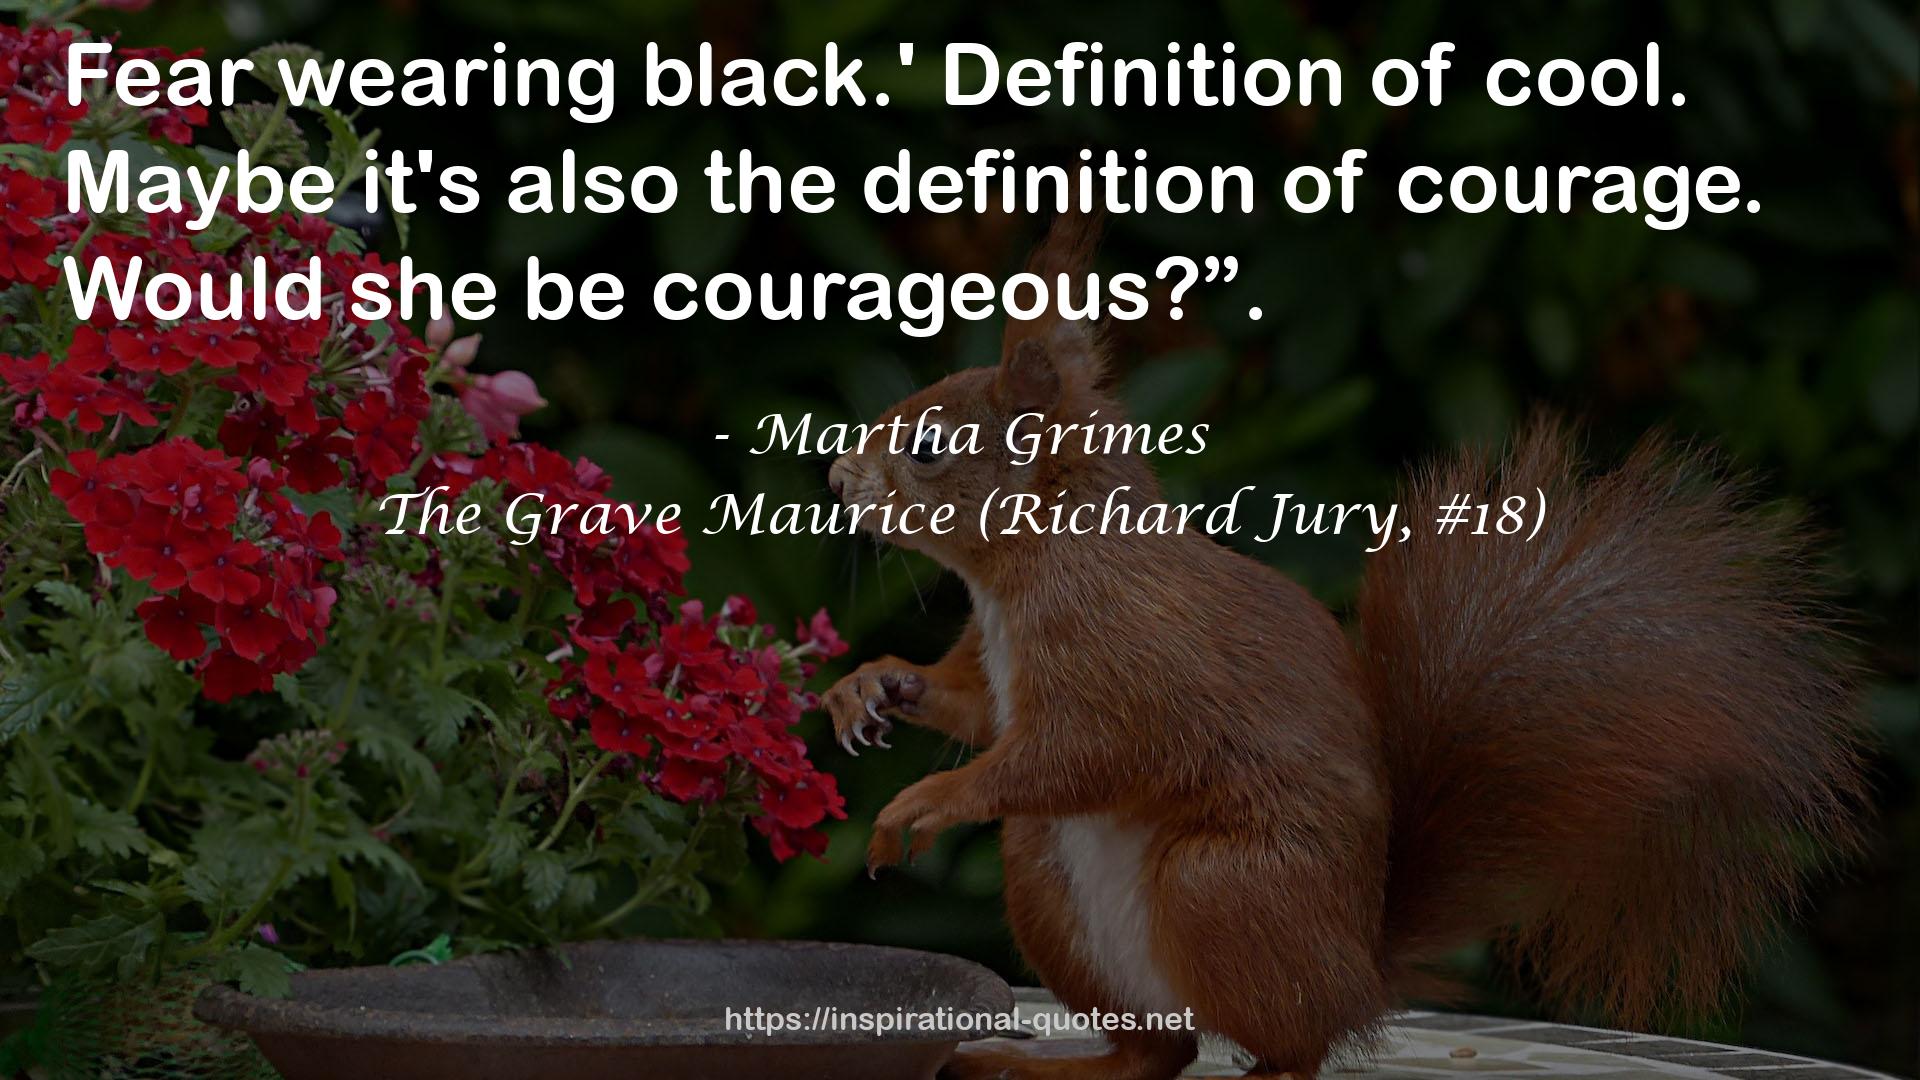 The Grave Maurice (Richard Jury, #18) QUOTES